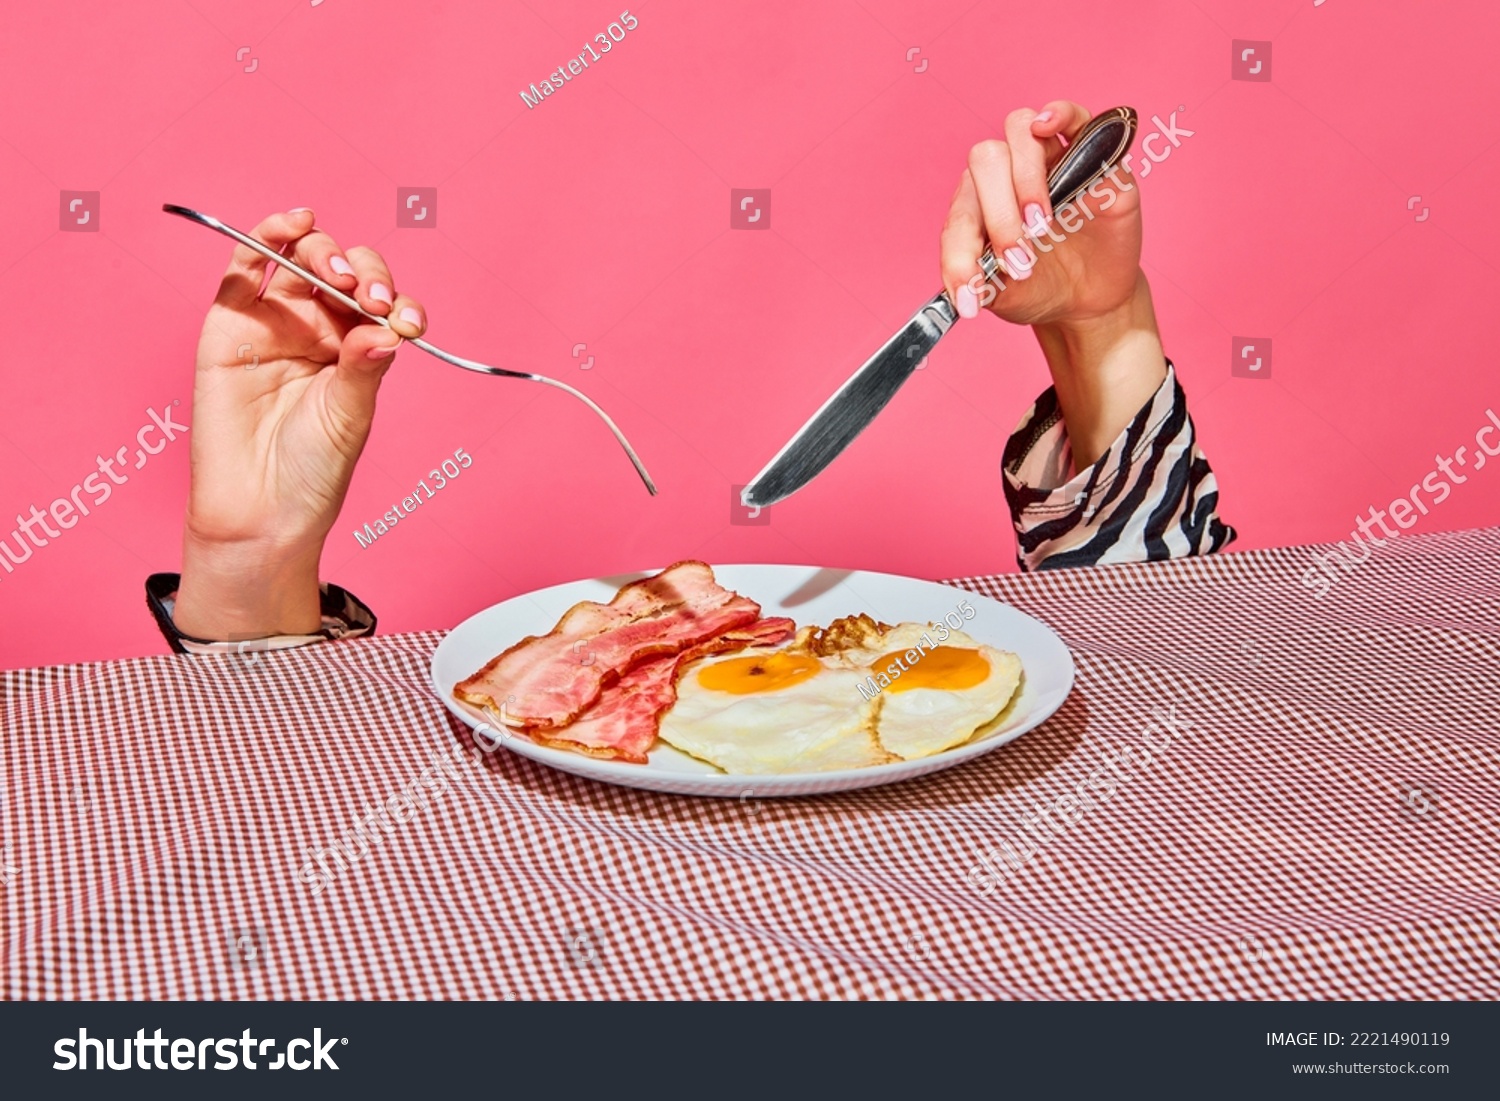 Female hands with fork and knife eating English breakfast with fried eggs and bacon . Vintage, retro style interior. Food pop art photography. Complementary colors. Copy space for ad, text #2221490119